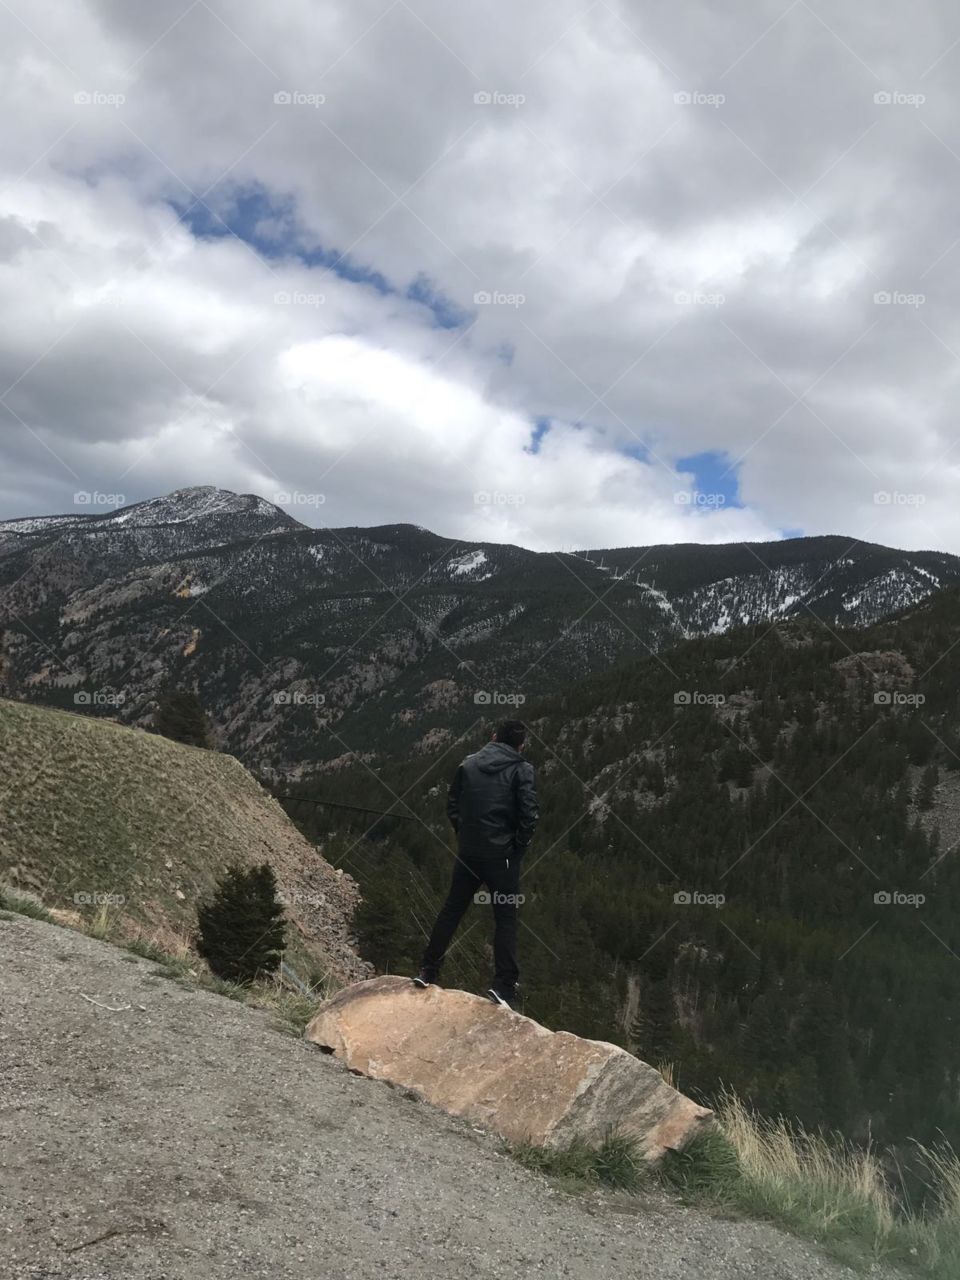 Overlooking the Colorado Mts May2017